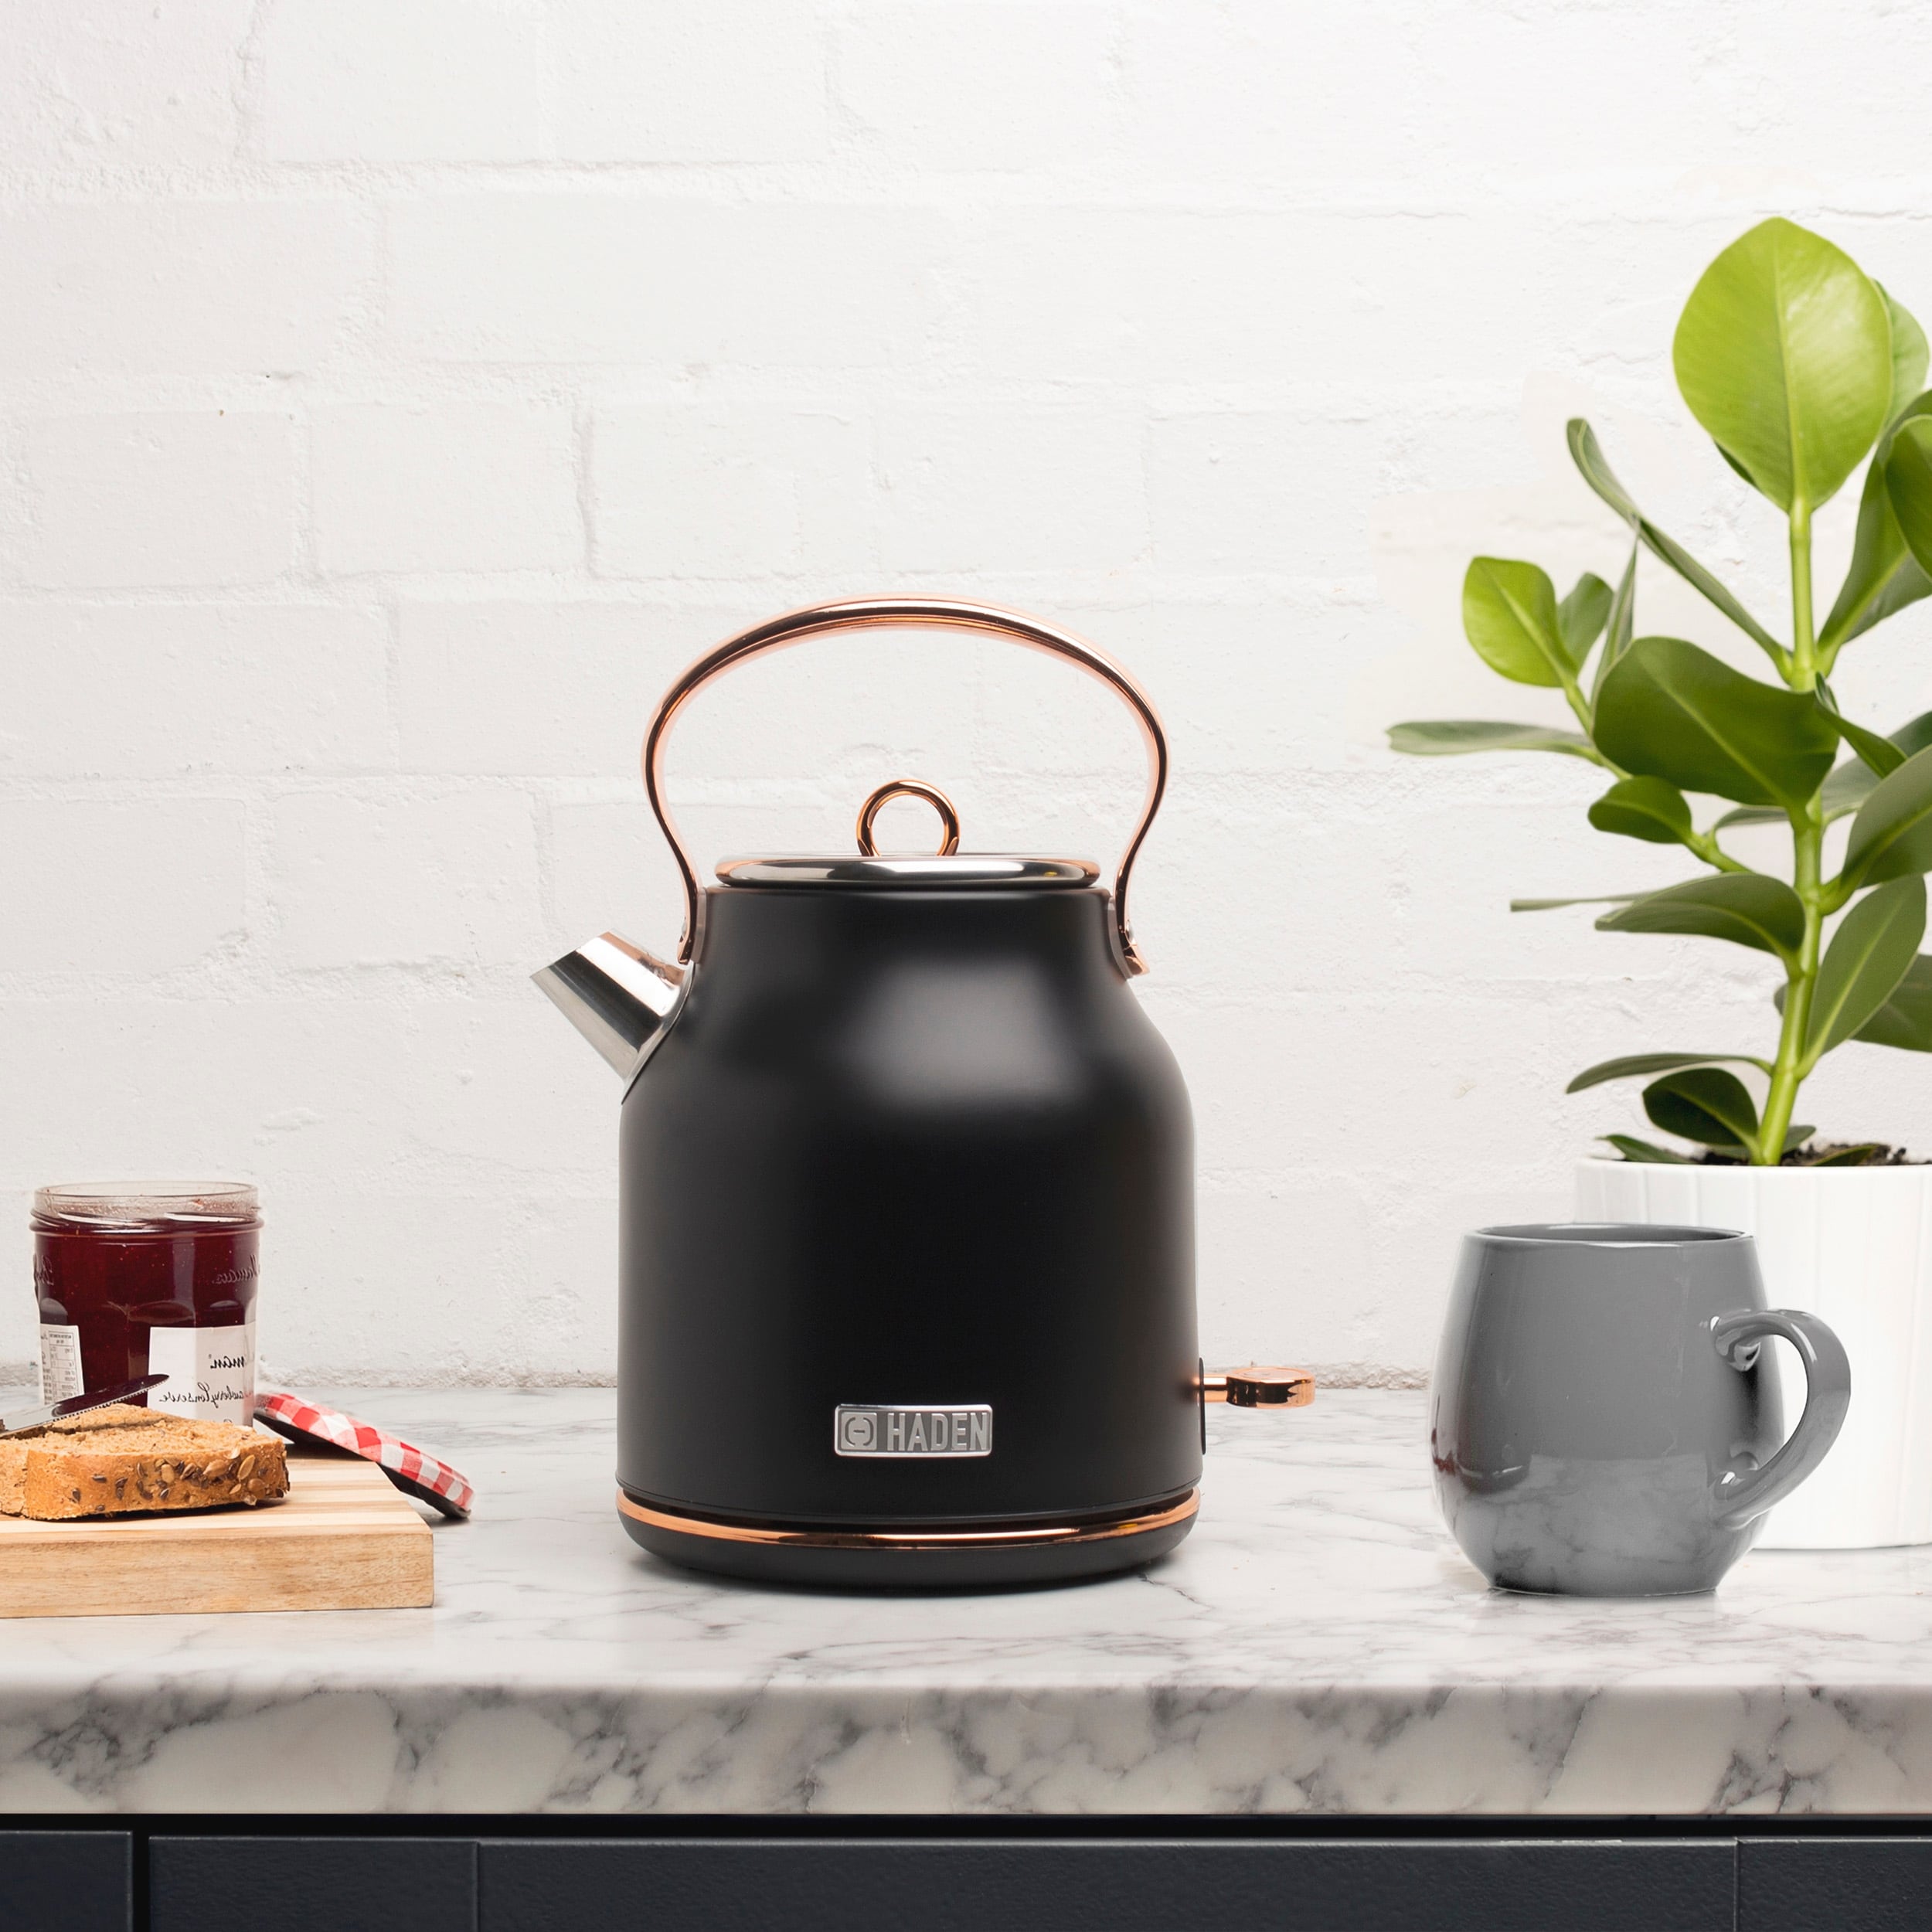 https://ak1.ostkcdn.com/images/products/is/images/direct/5ab6e4df8446a987c7309e38005f547bdcca3167/Haden-Heritage-1.7-Liter-Stainless-Steel-Electric-Tea-Kettle.jpg